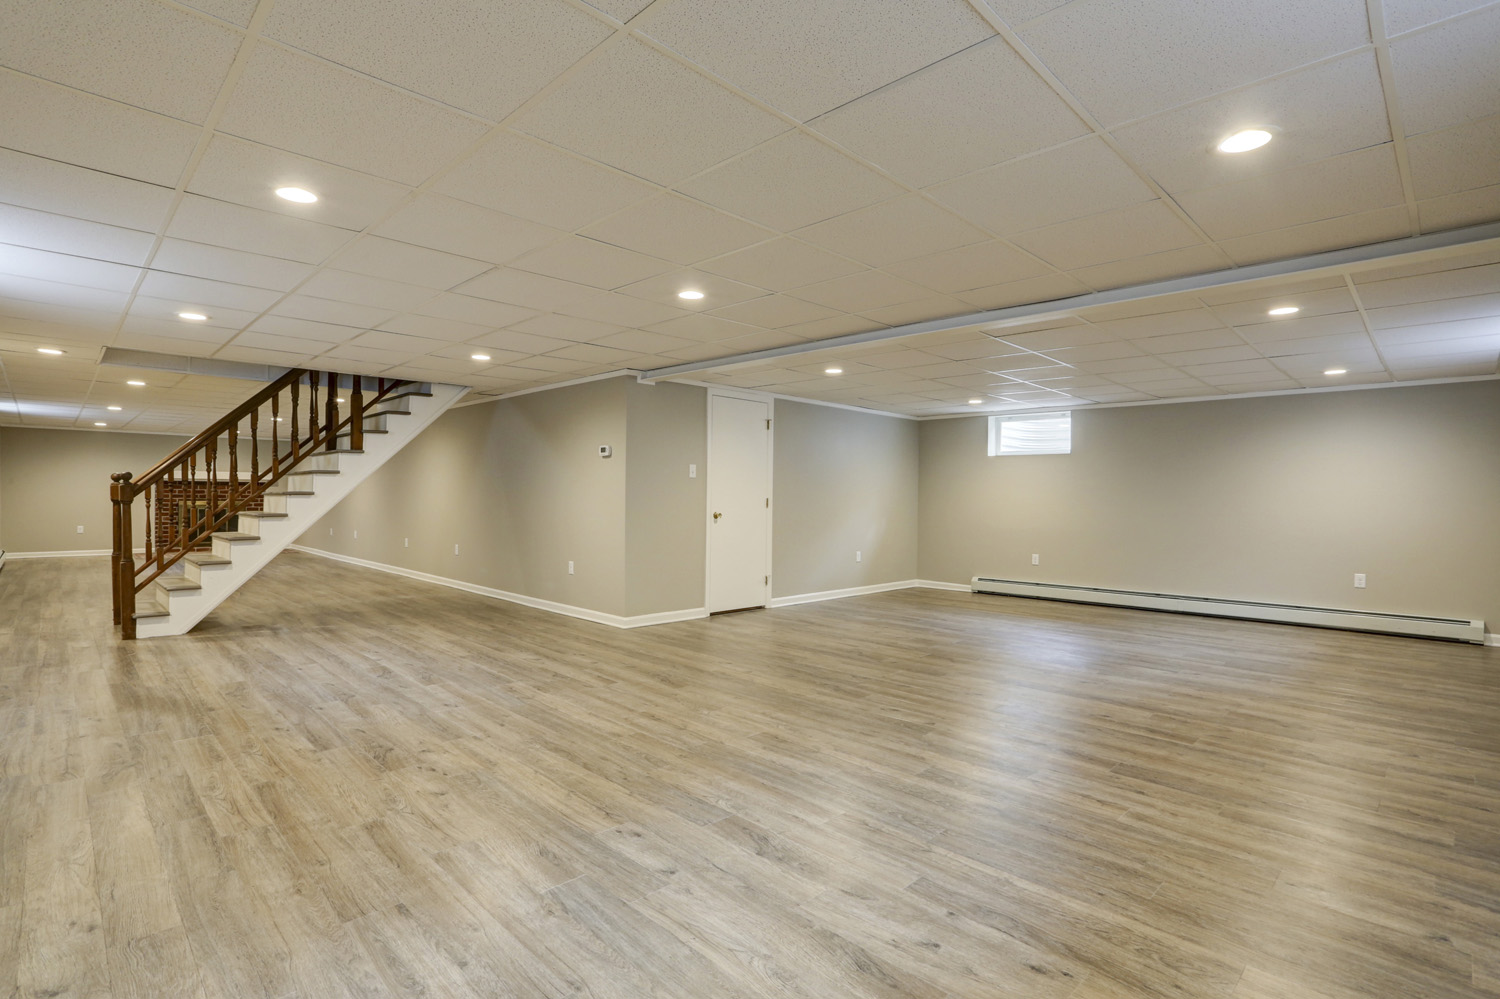 Millersville Basement Remodel with large open space